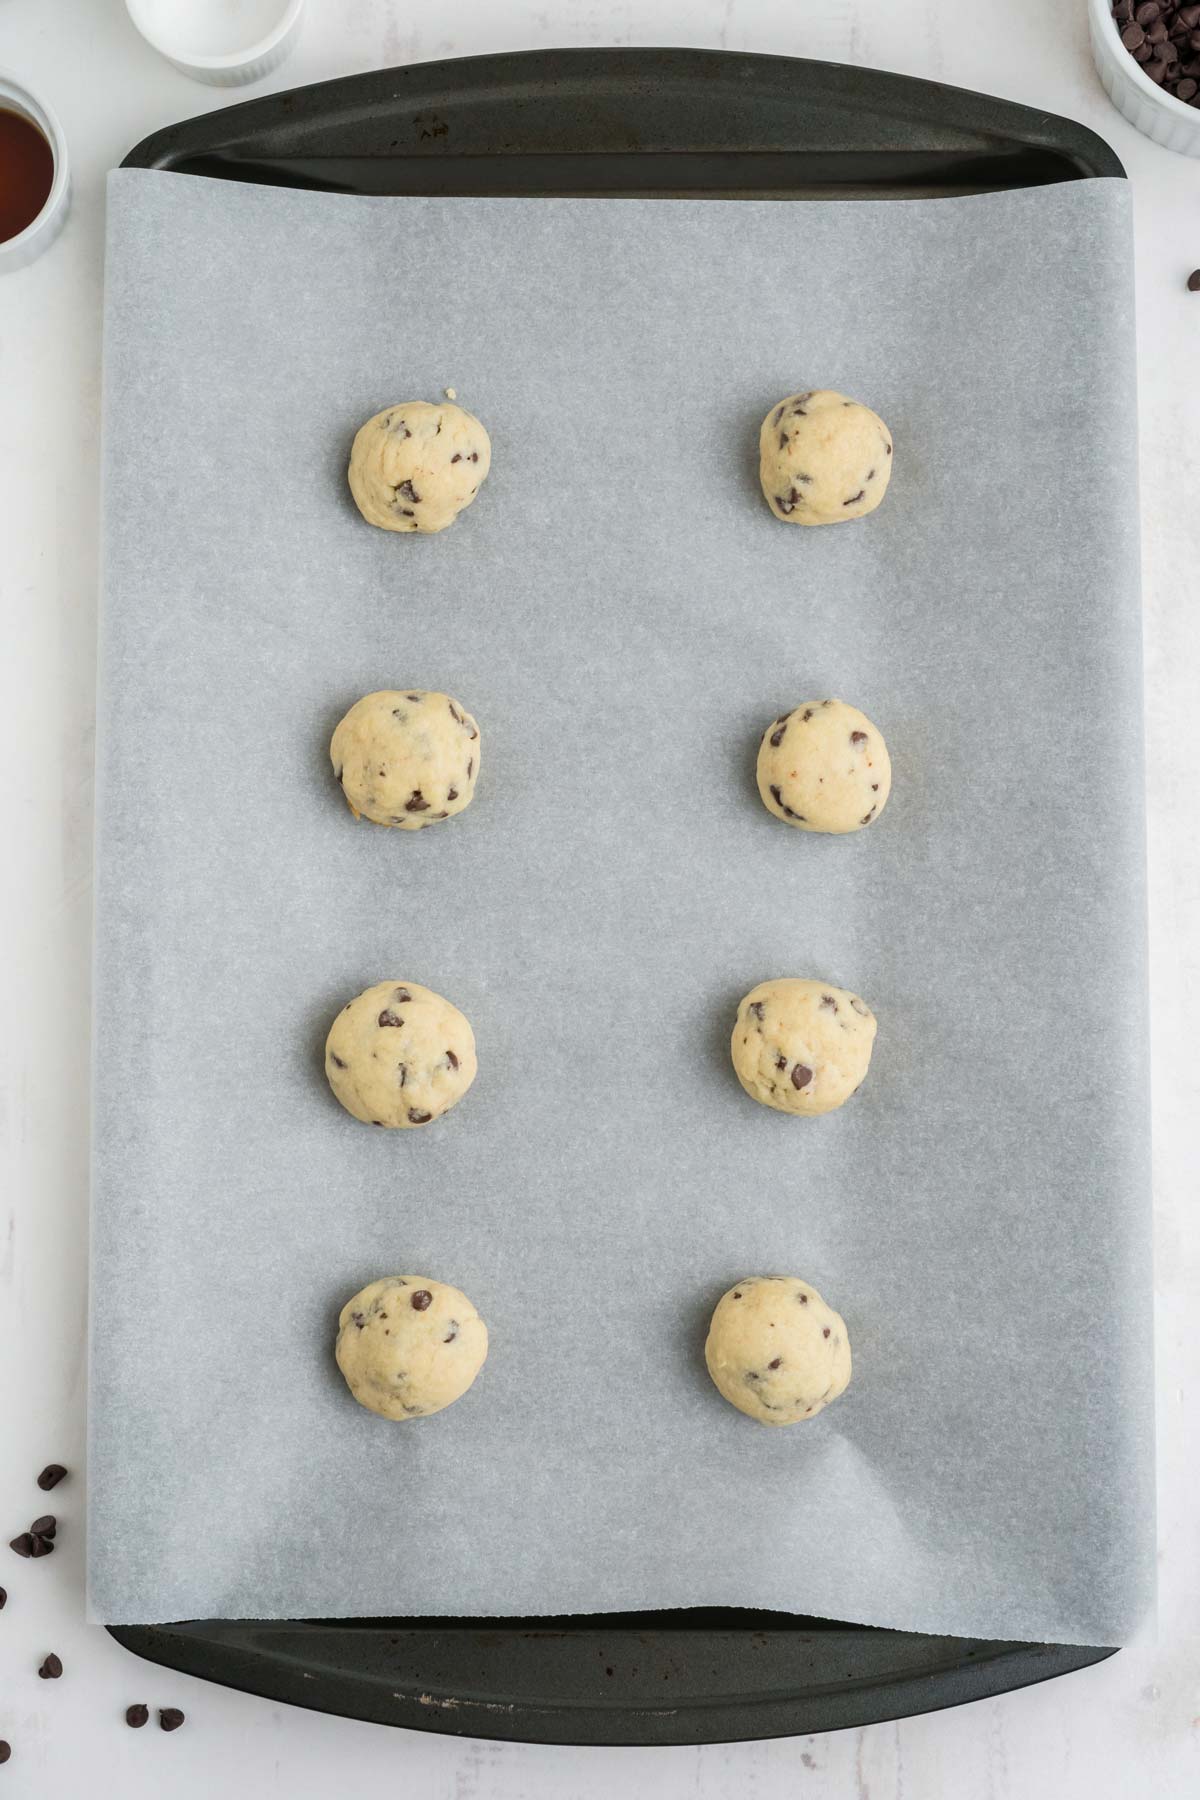 Chocolate chip snowball cookies after baking on a baking tray.